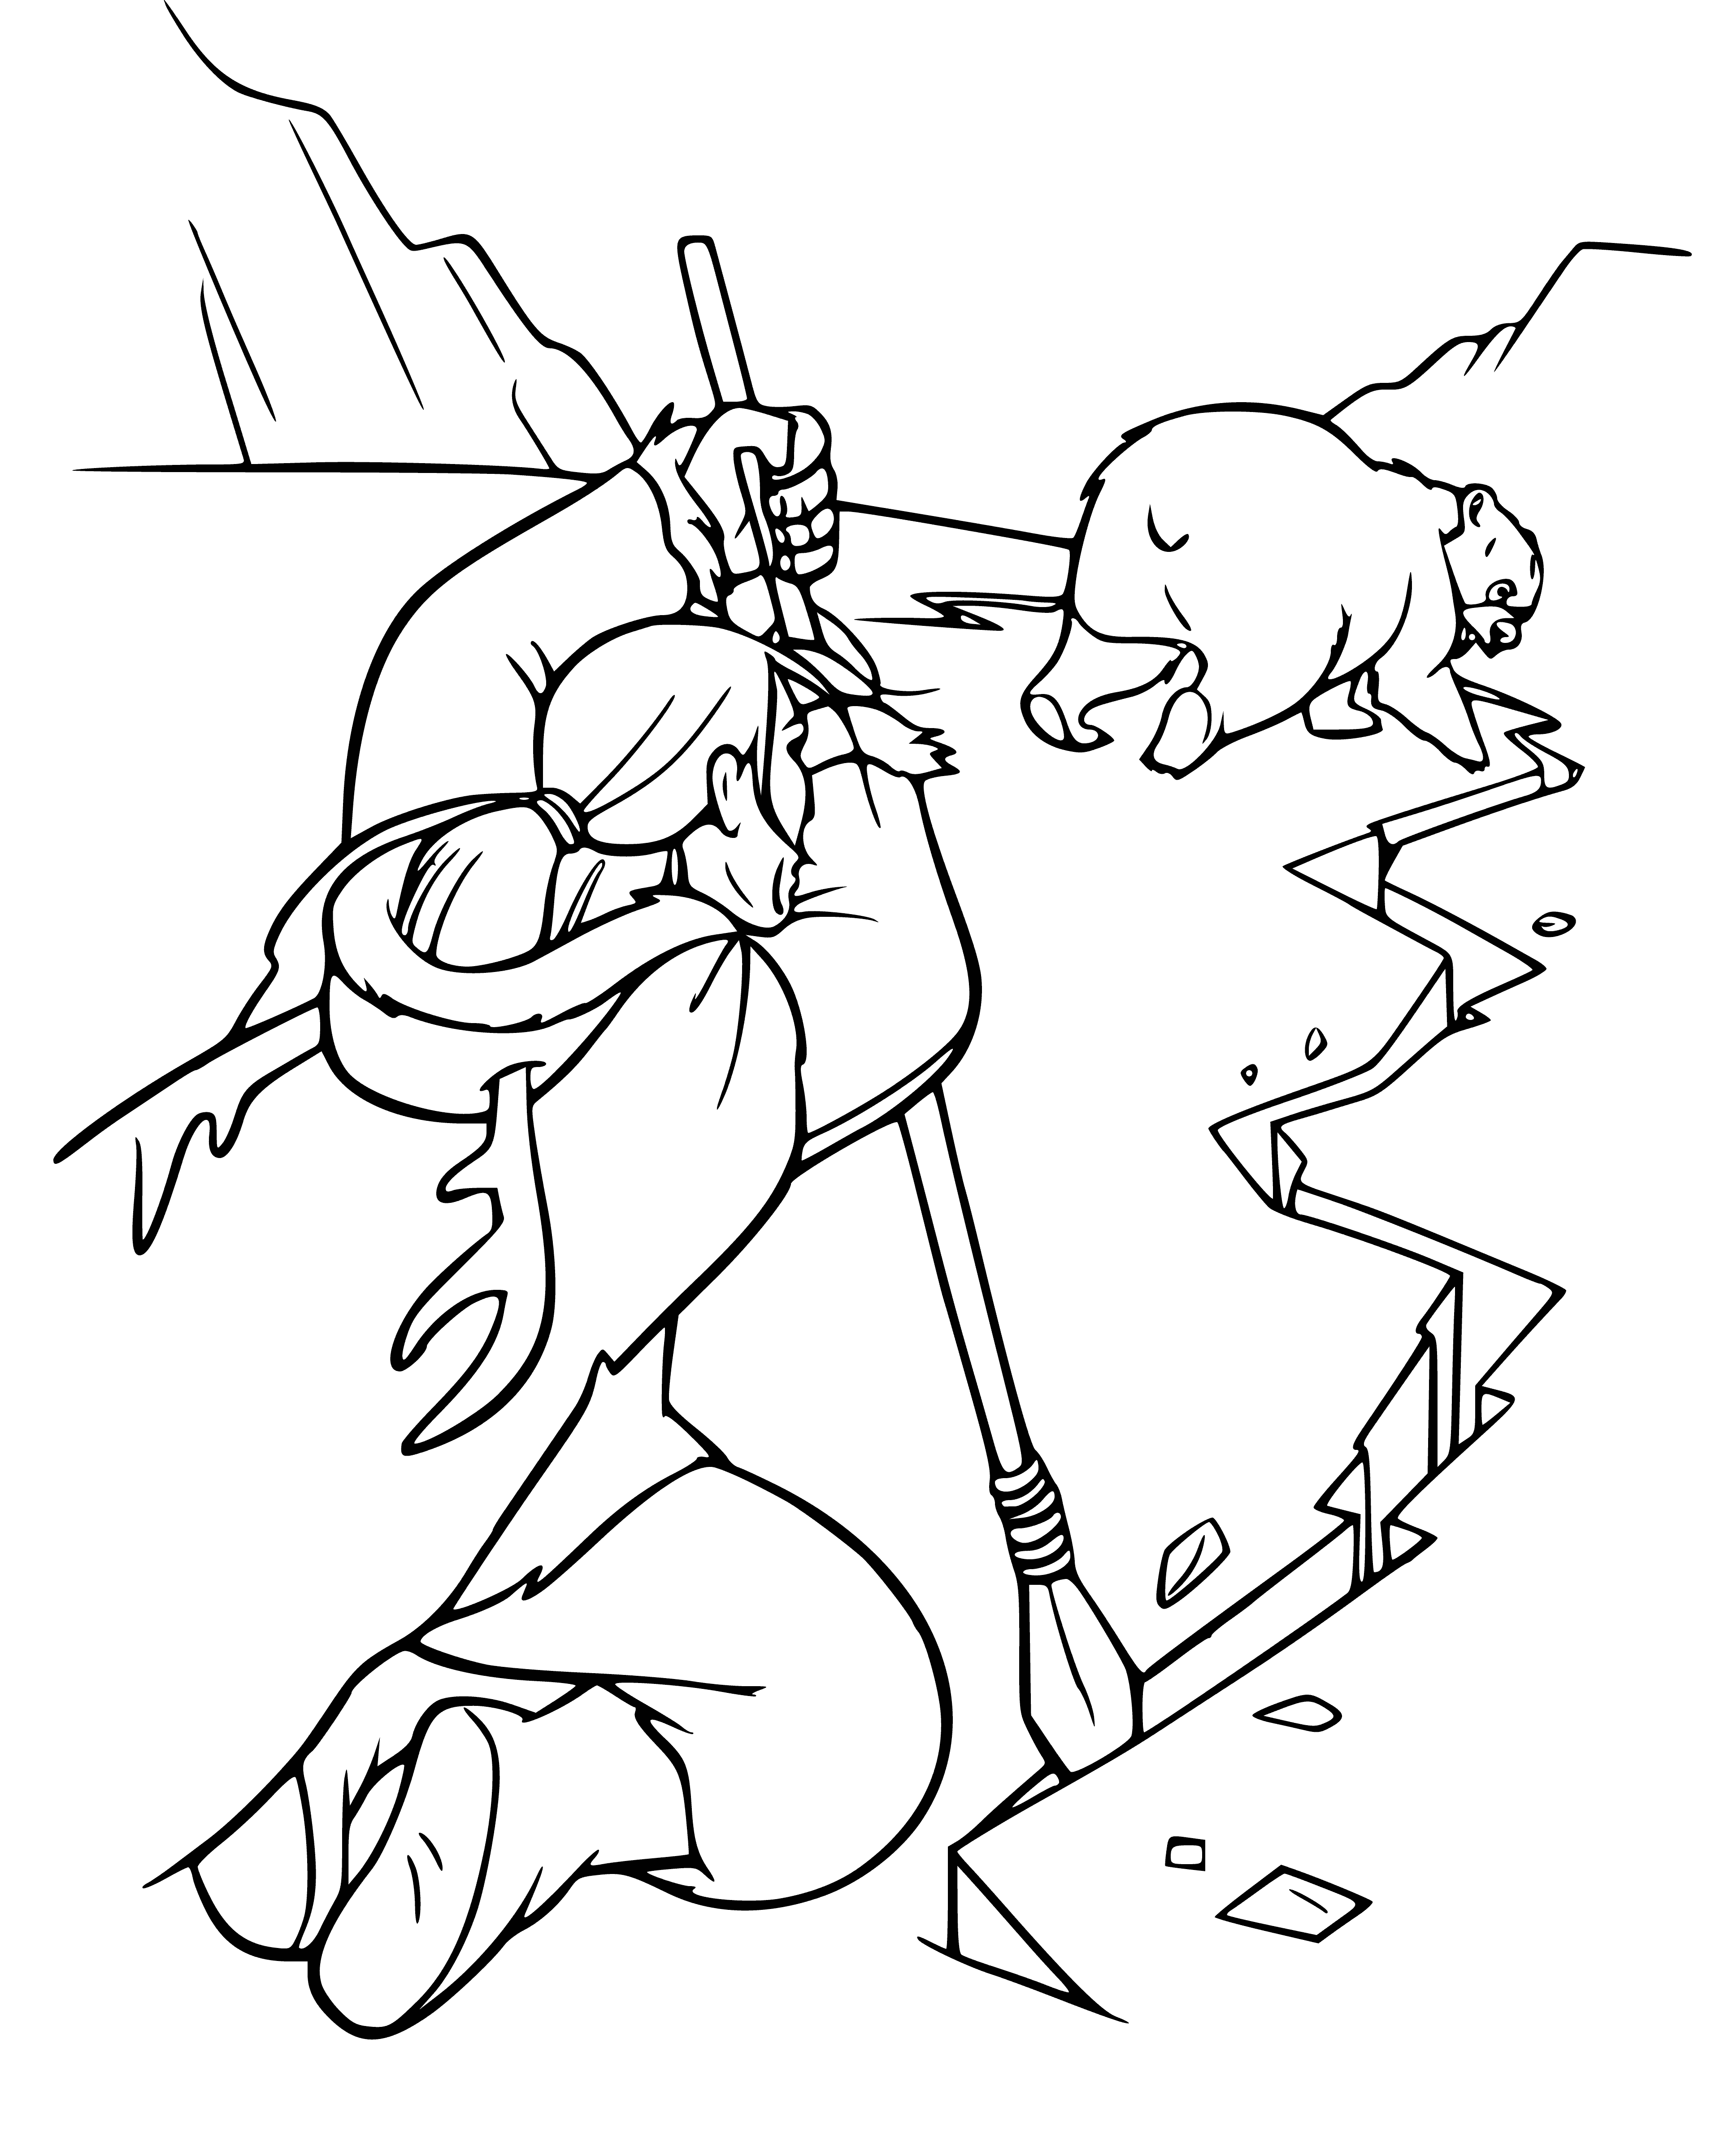 Crack in ice coloring page